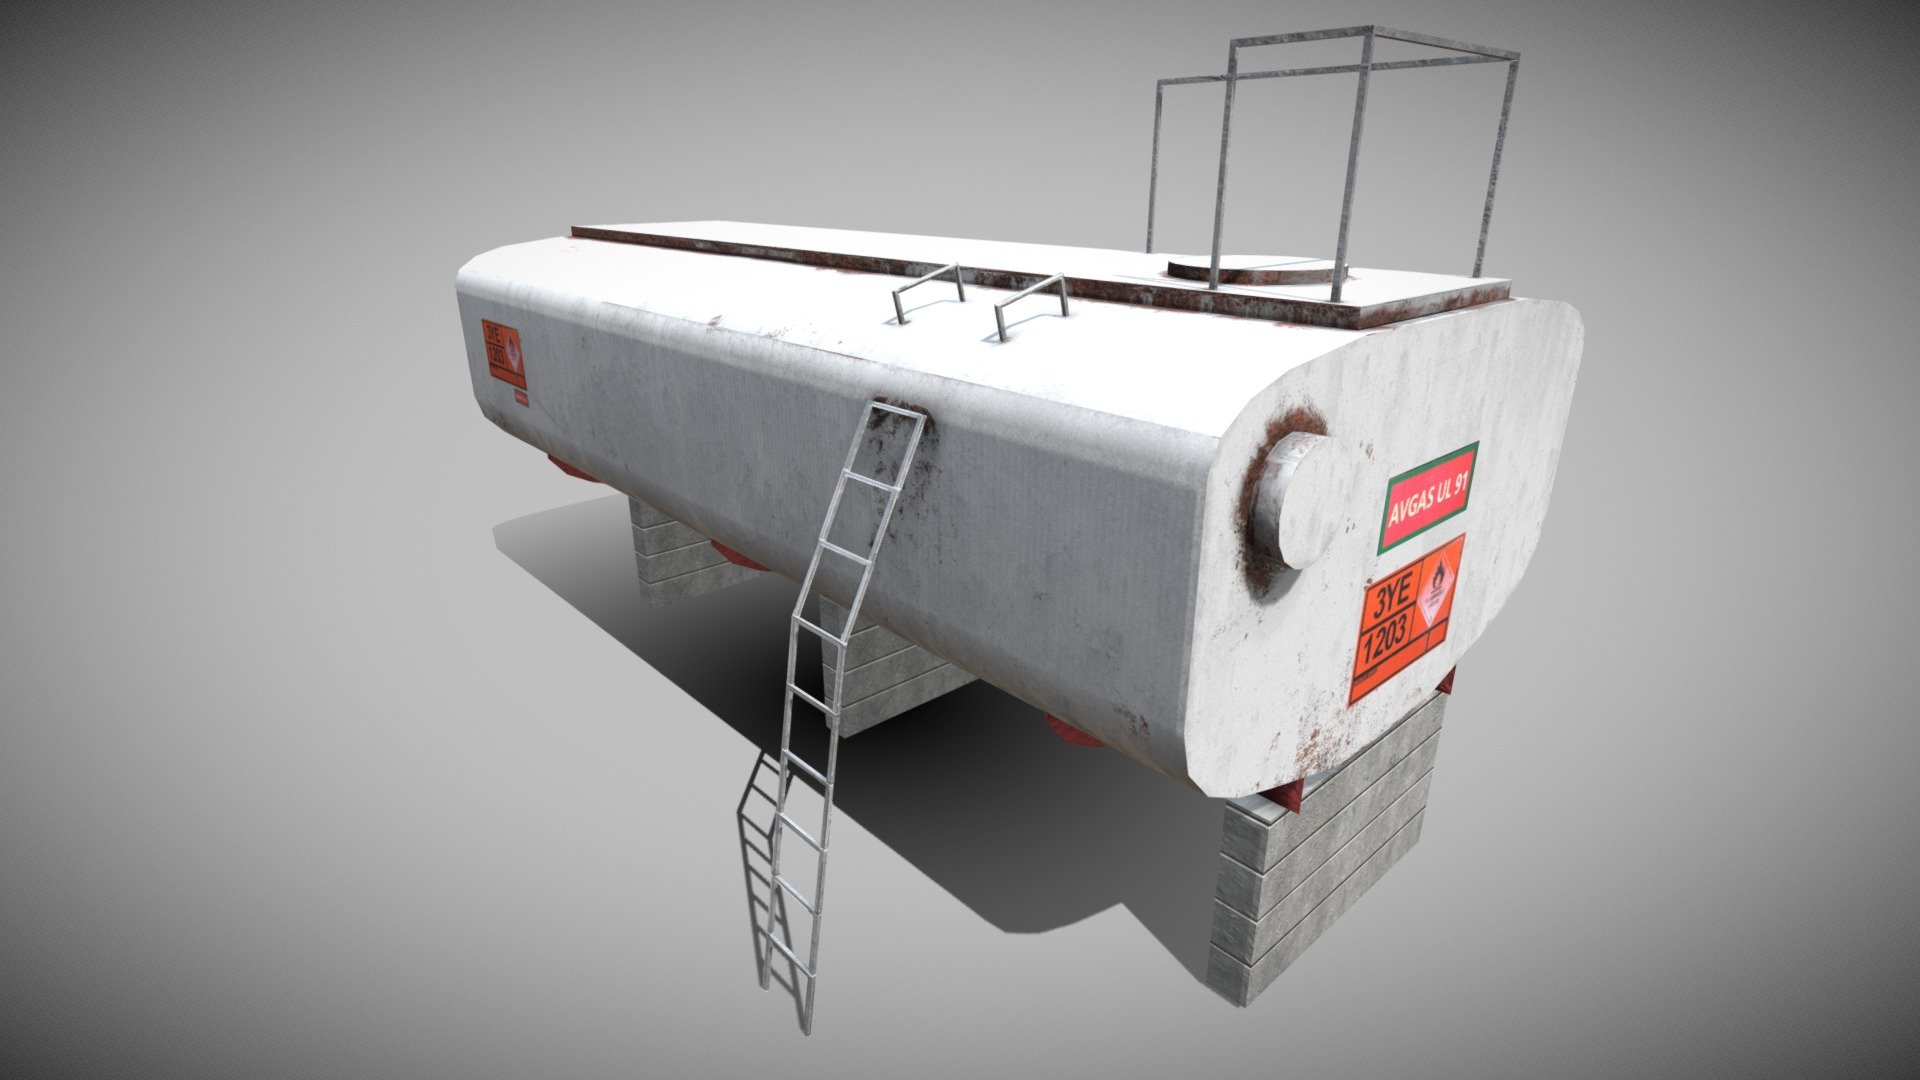 An aviation Fuel Tank found at airports. Low poly model ready for game use - Fuel Tank 2 - Low Poly Game Ready - Buy Royalty Free 3D model by Gobby (@thegobby) 3d model